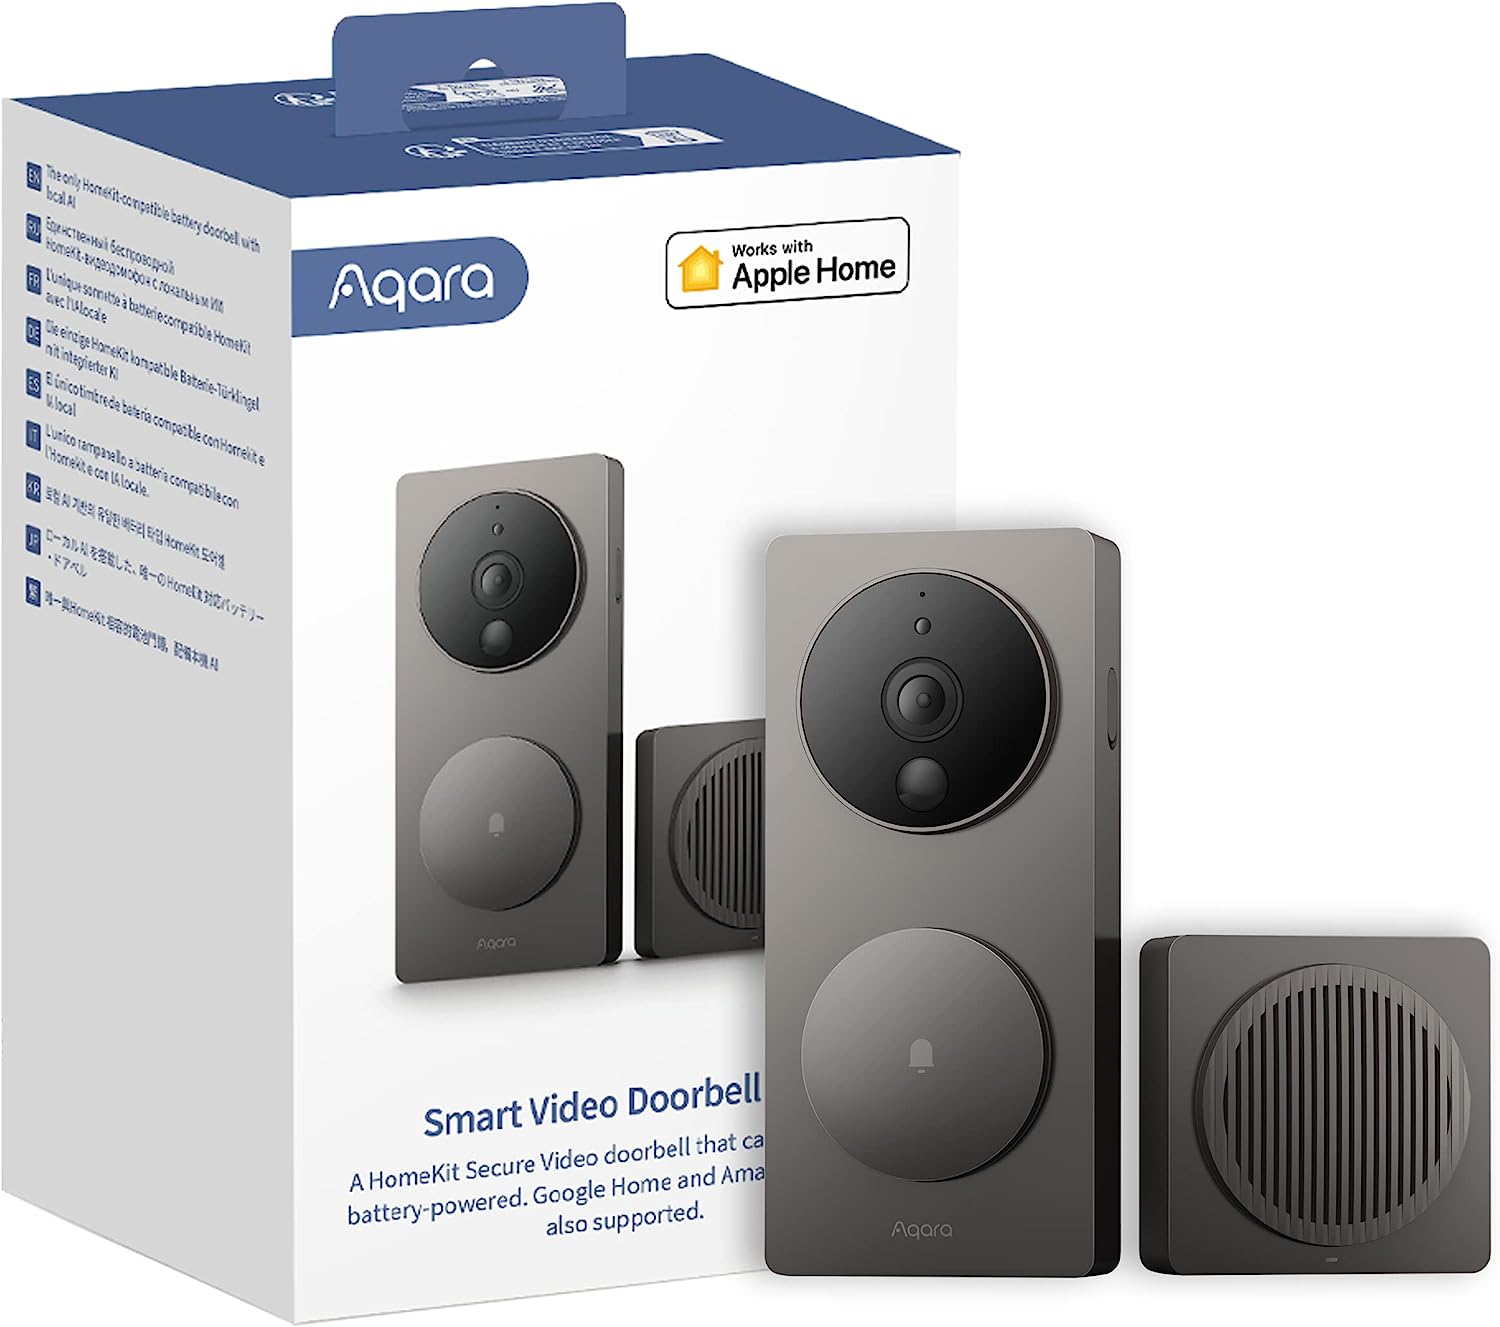 Aqara Video Doorbell G4 with Facial Recognition Released – Including HomeKit support and 24/7 recording